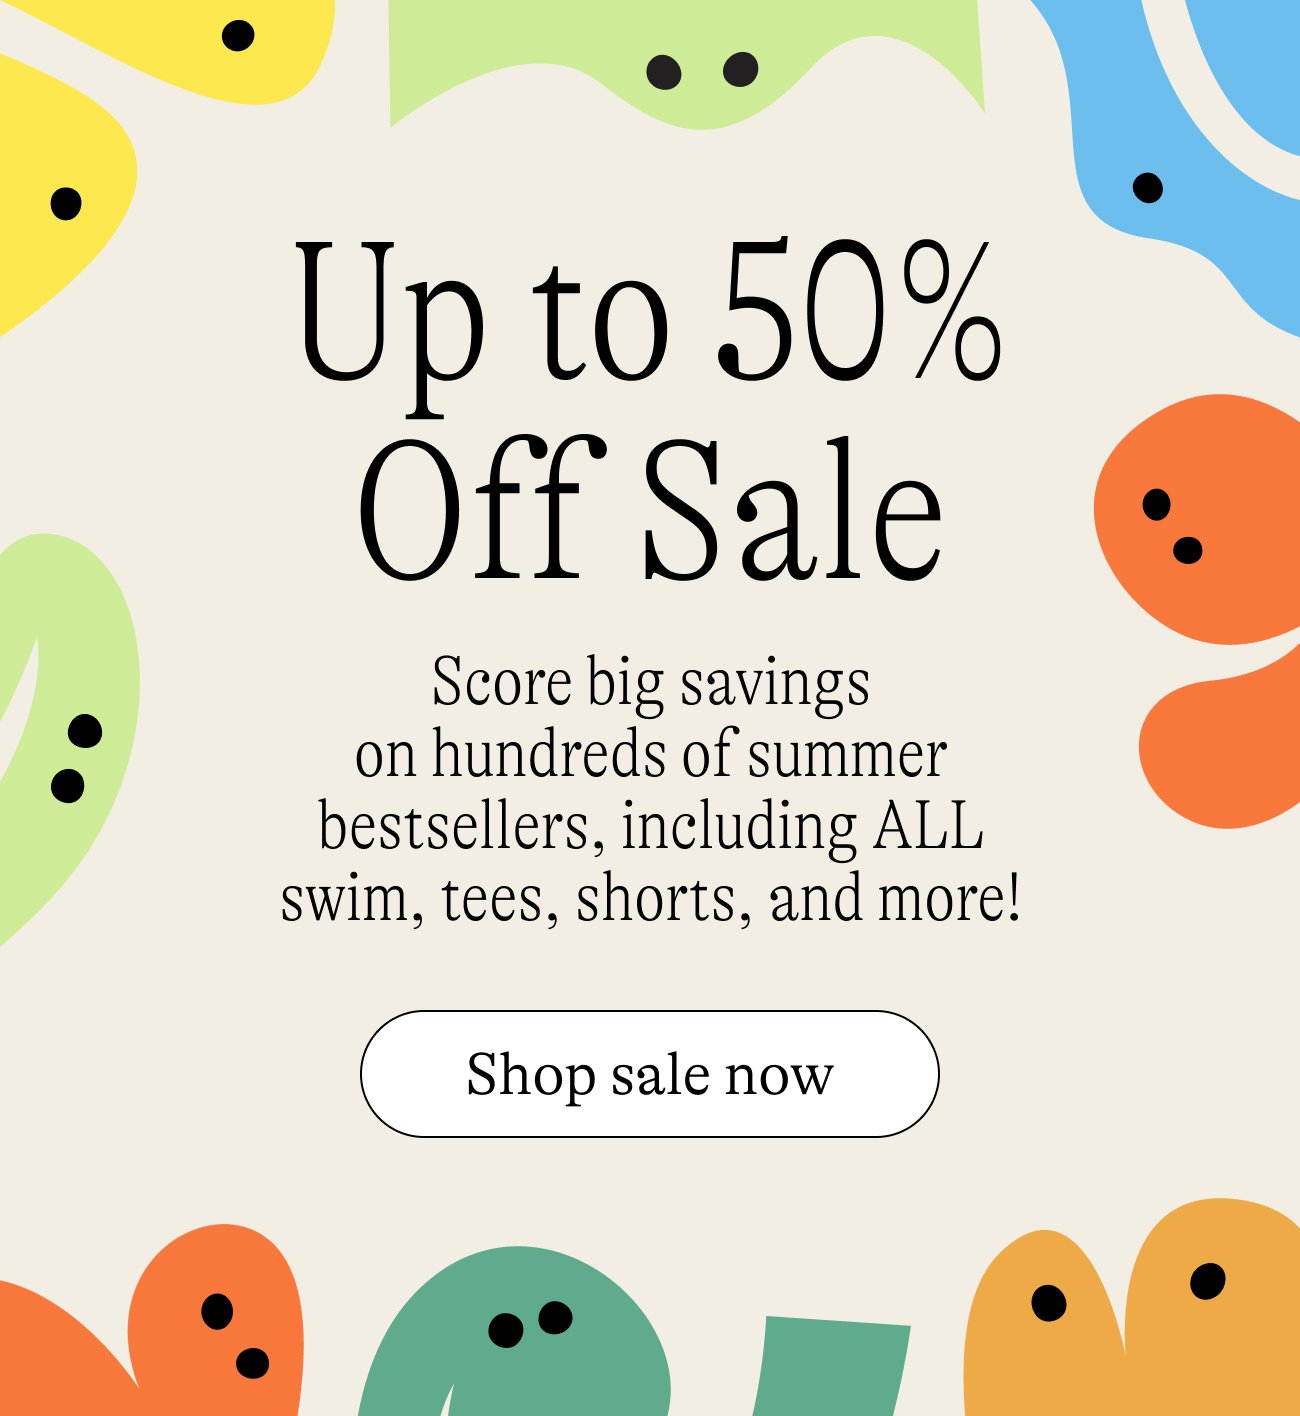 Price drop! Here's a spotlight on amazing swim deals added to our Up to 50% Off sale, just for you.